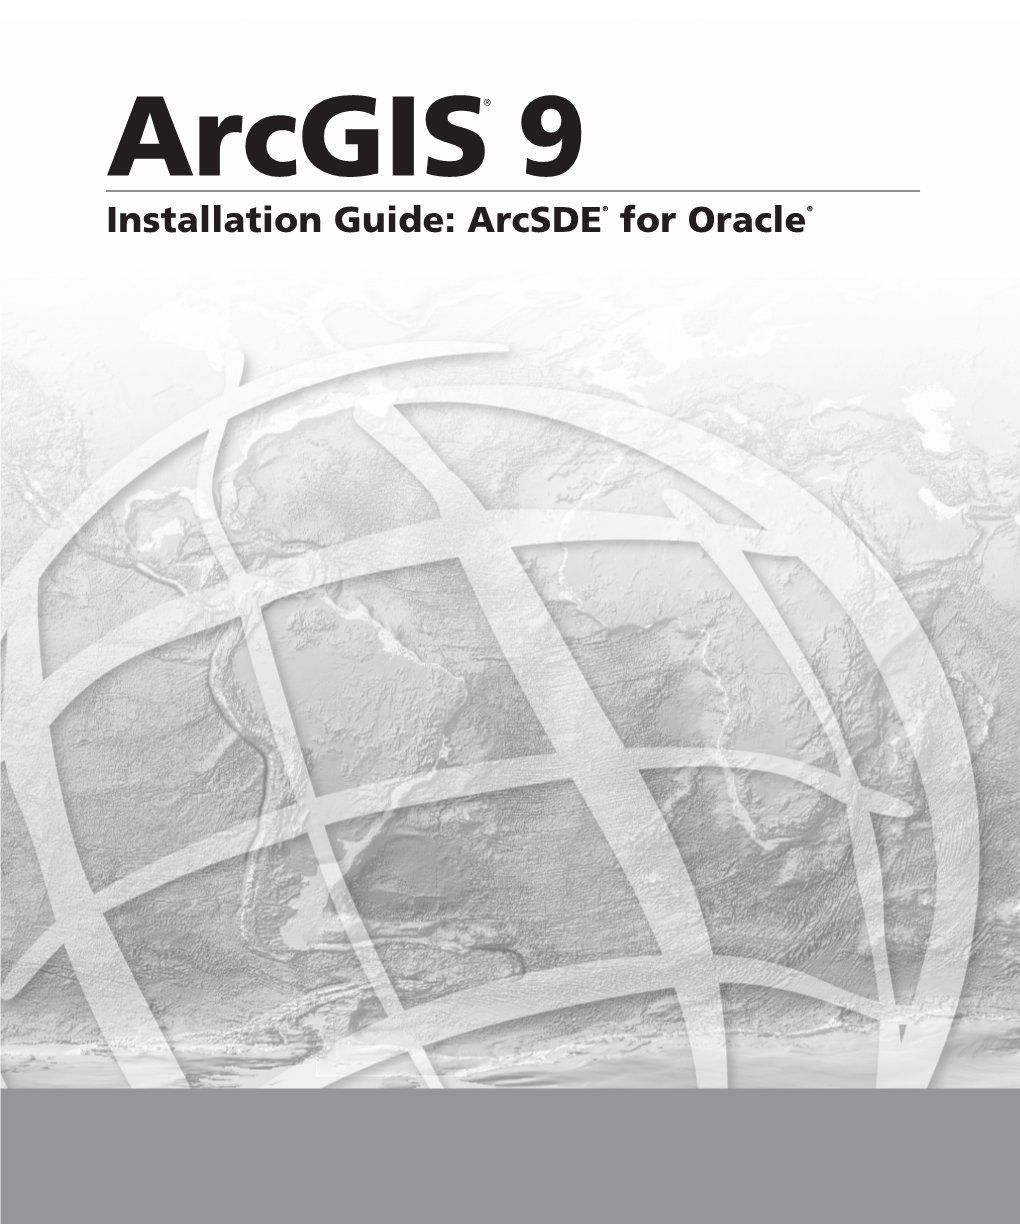 Installation Guide: Arcsde for Oracle